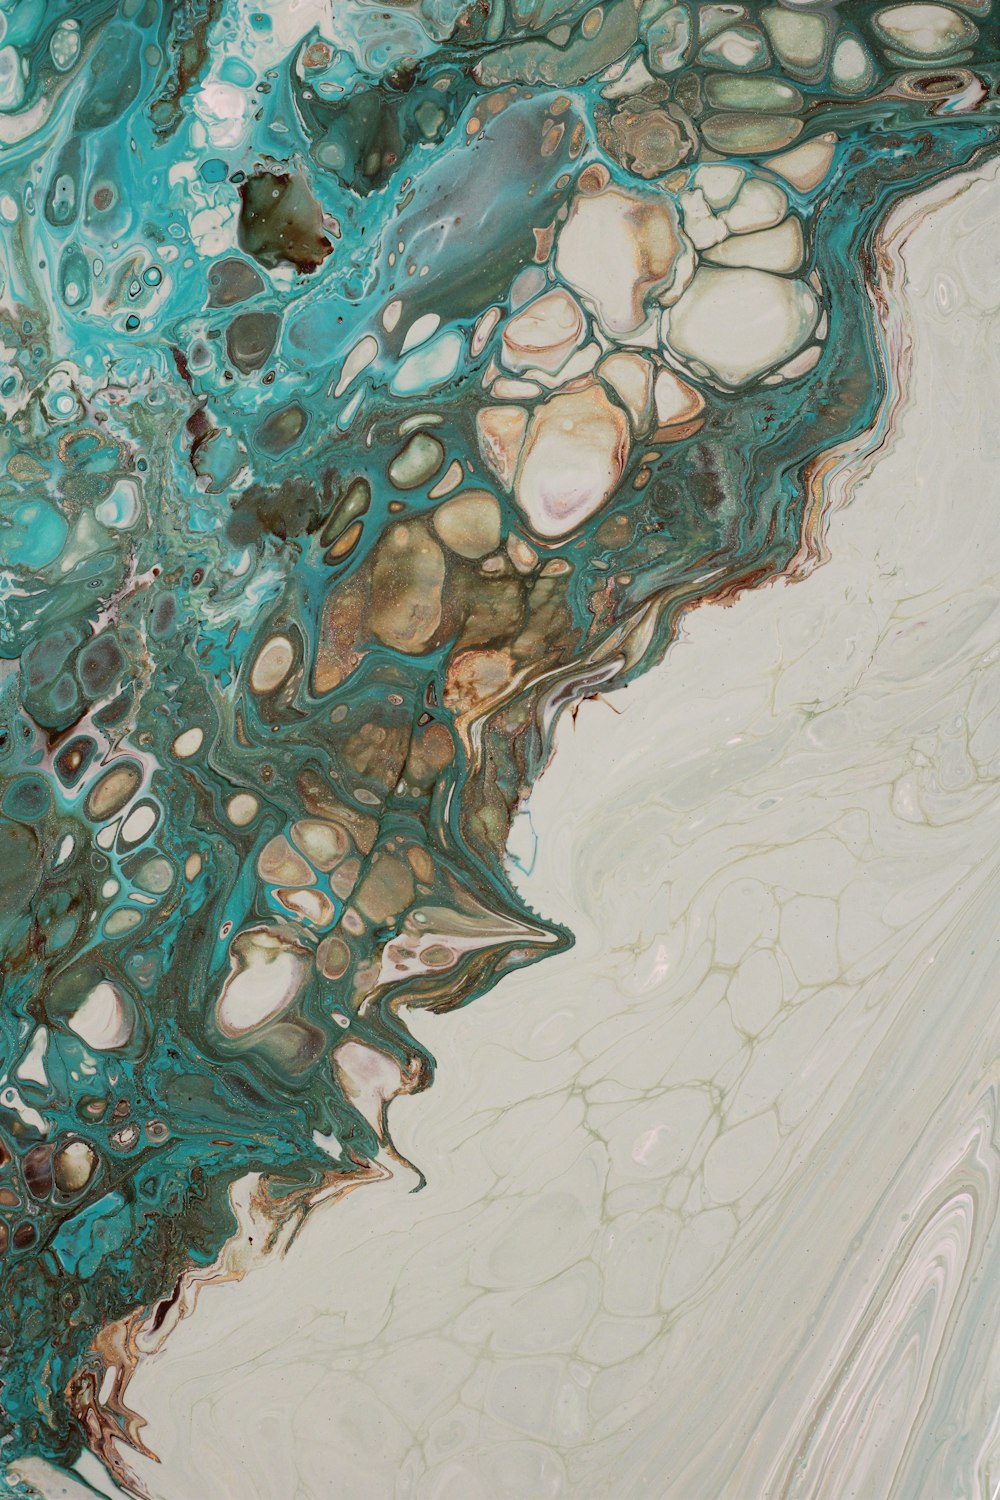 a close up of a blue and white fluid painting